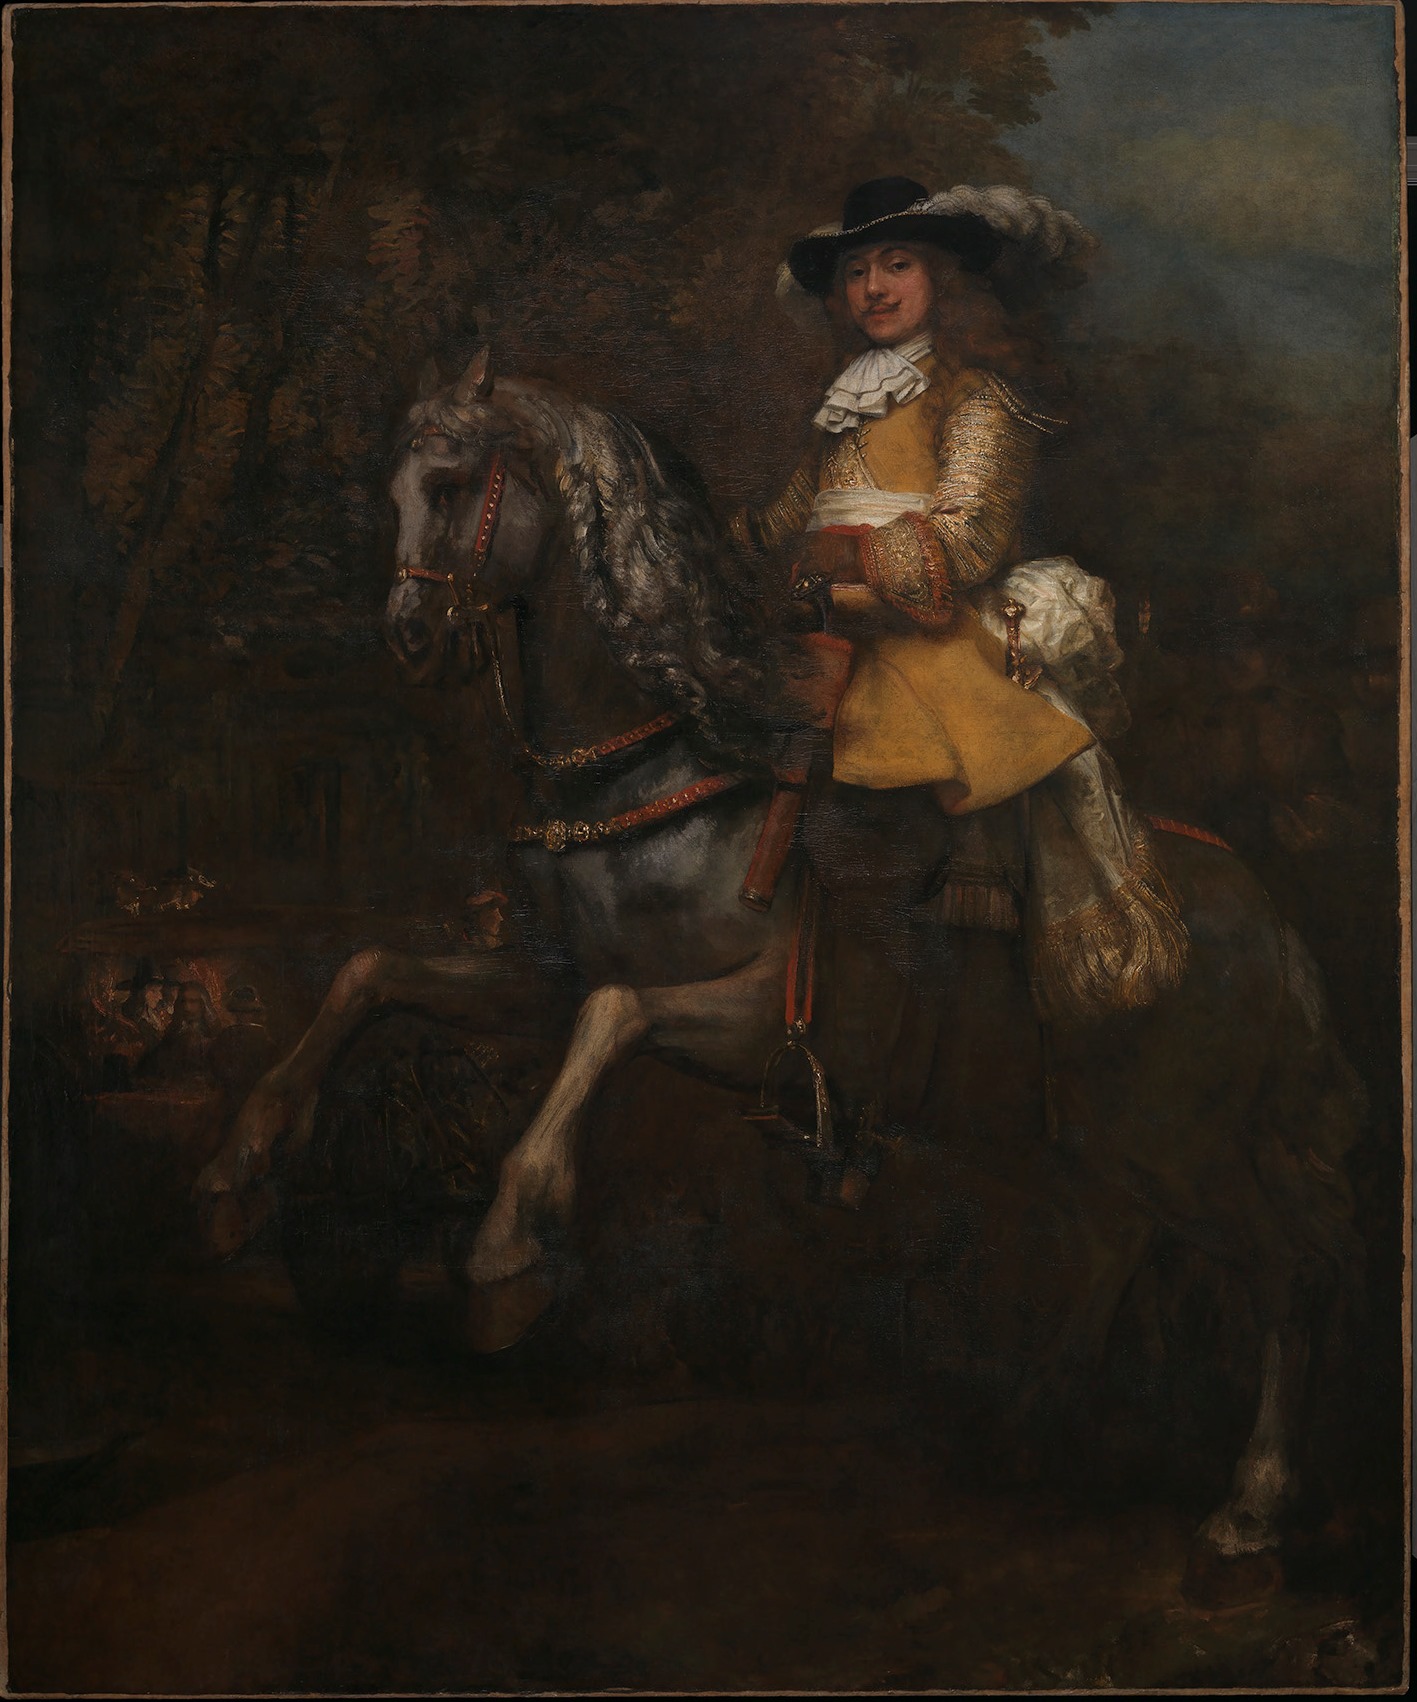 NG6300
Rembrandt
Portrait of Frederick Rihel on Horseback
Dutch, probably 1663
Oil on canvas
294.5 x 241 cm
Bought with a special grant and contributions from The Art Fund and The Pilgrim Trust, 1959
© The National Gallery, London